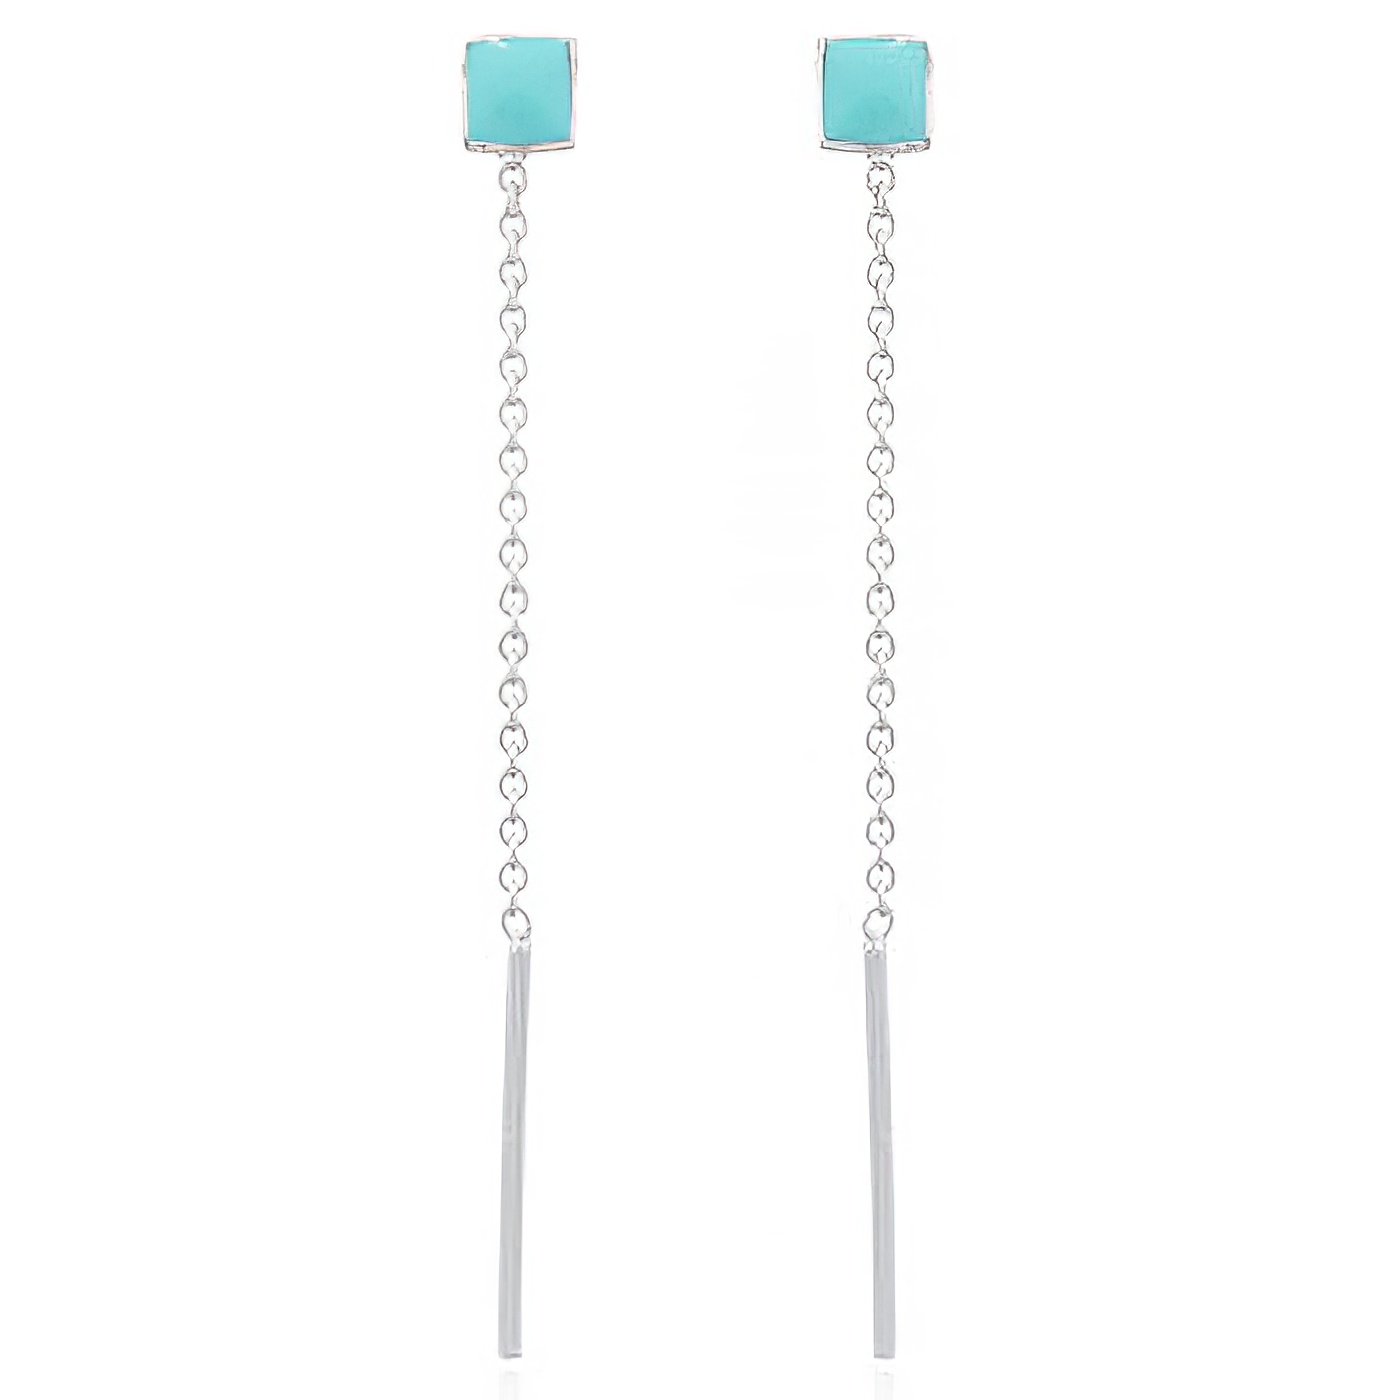 Reconstituted Stone Green Square 925 Silver Threader Earrings by BeYindi 